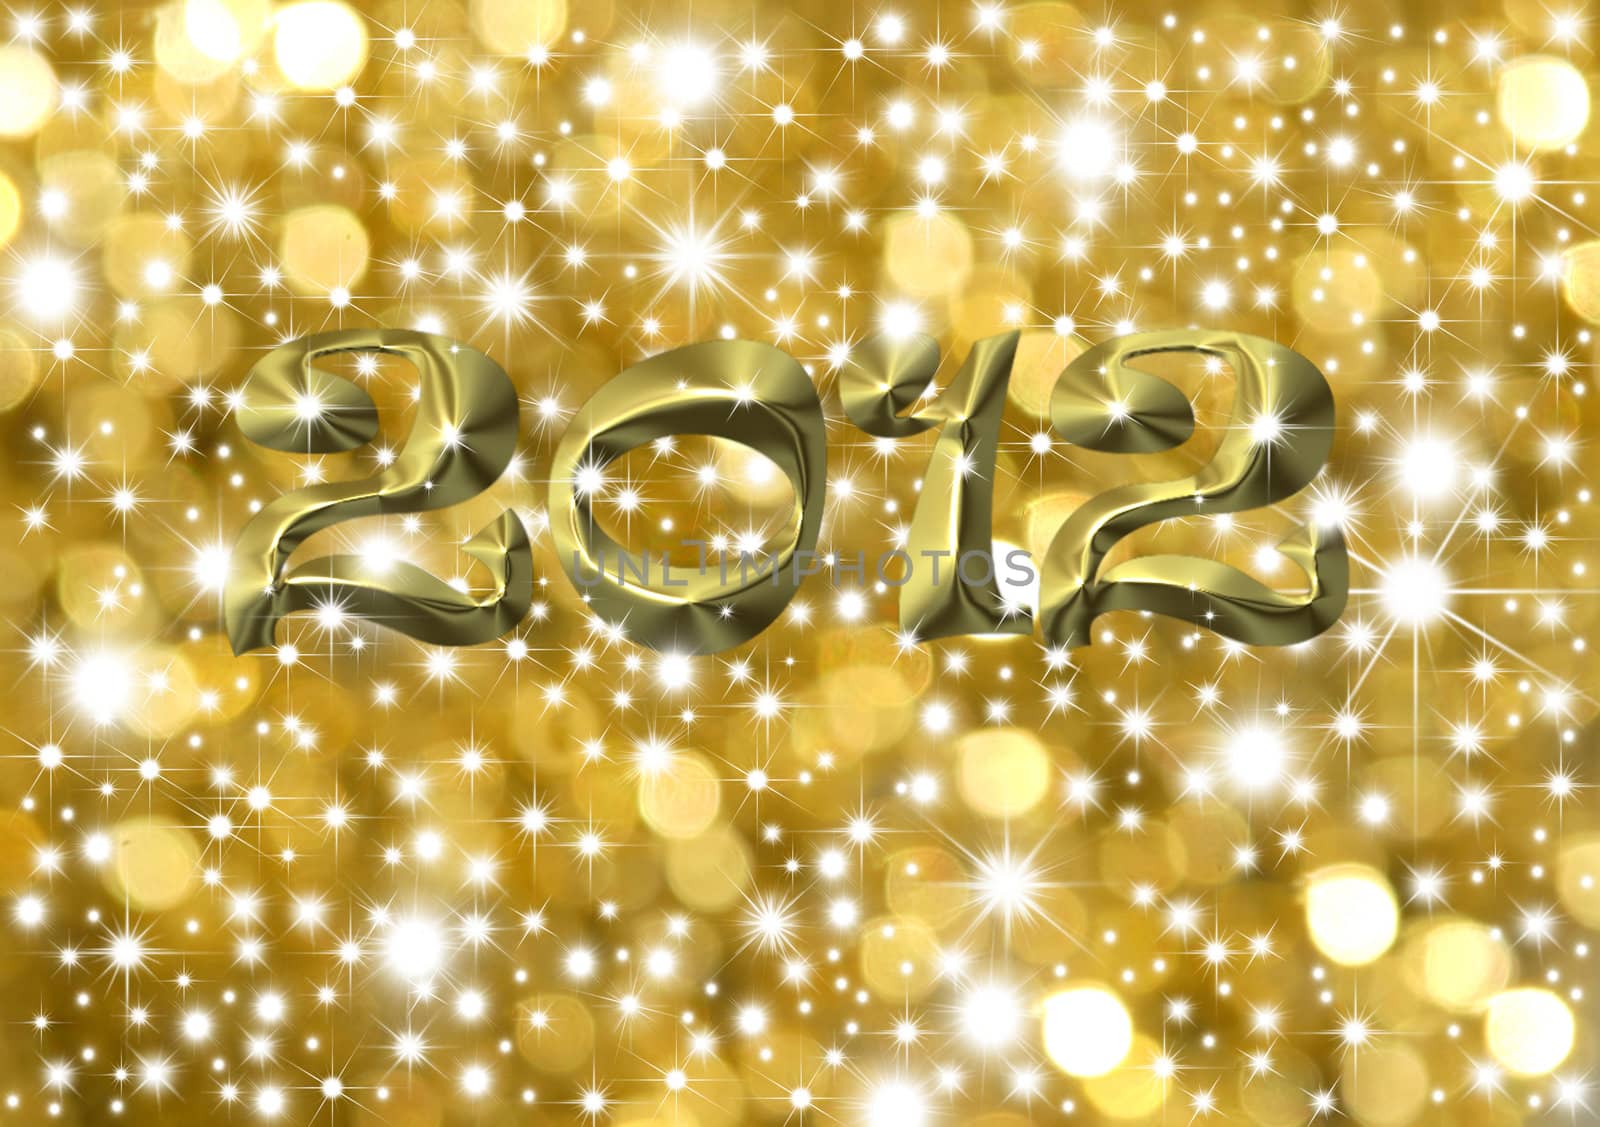 Christmas Card 2012, a gold background with stars